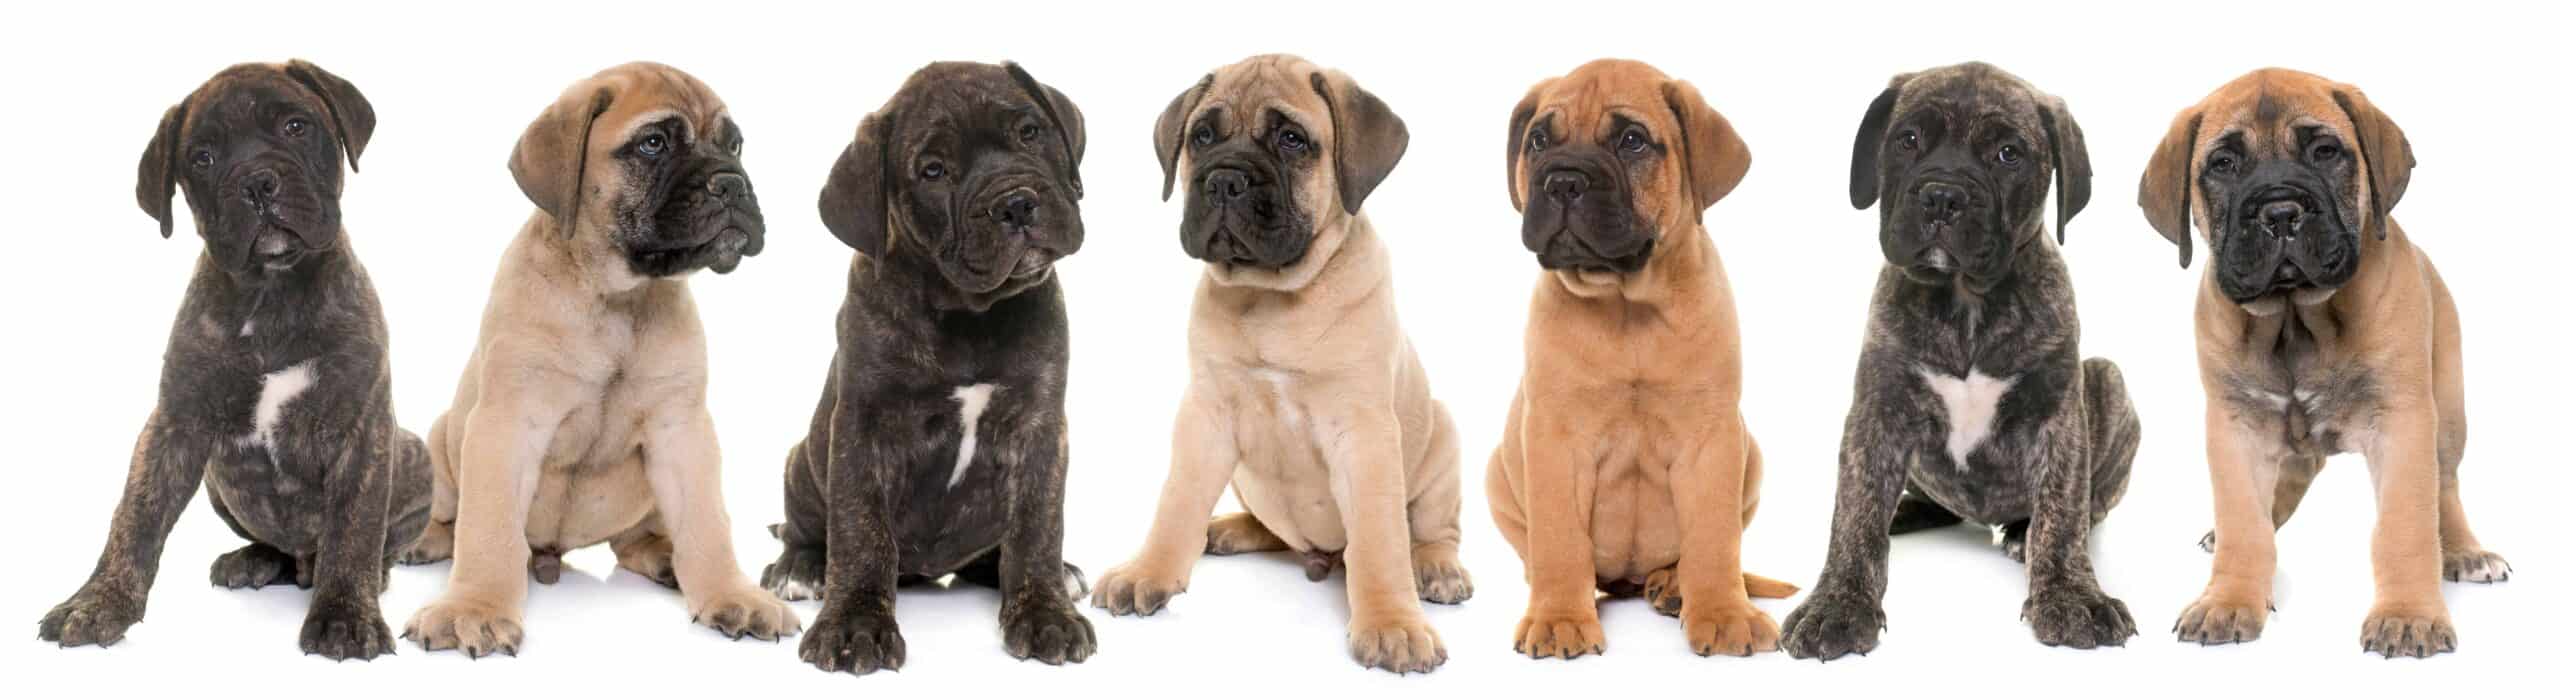 Bullmastiff puppies. The Mastiff is a massive, muscular dog known for its noble and loyal disposition, making it an ideal family pet.